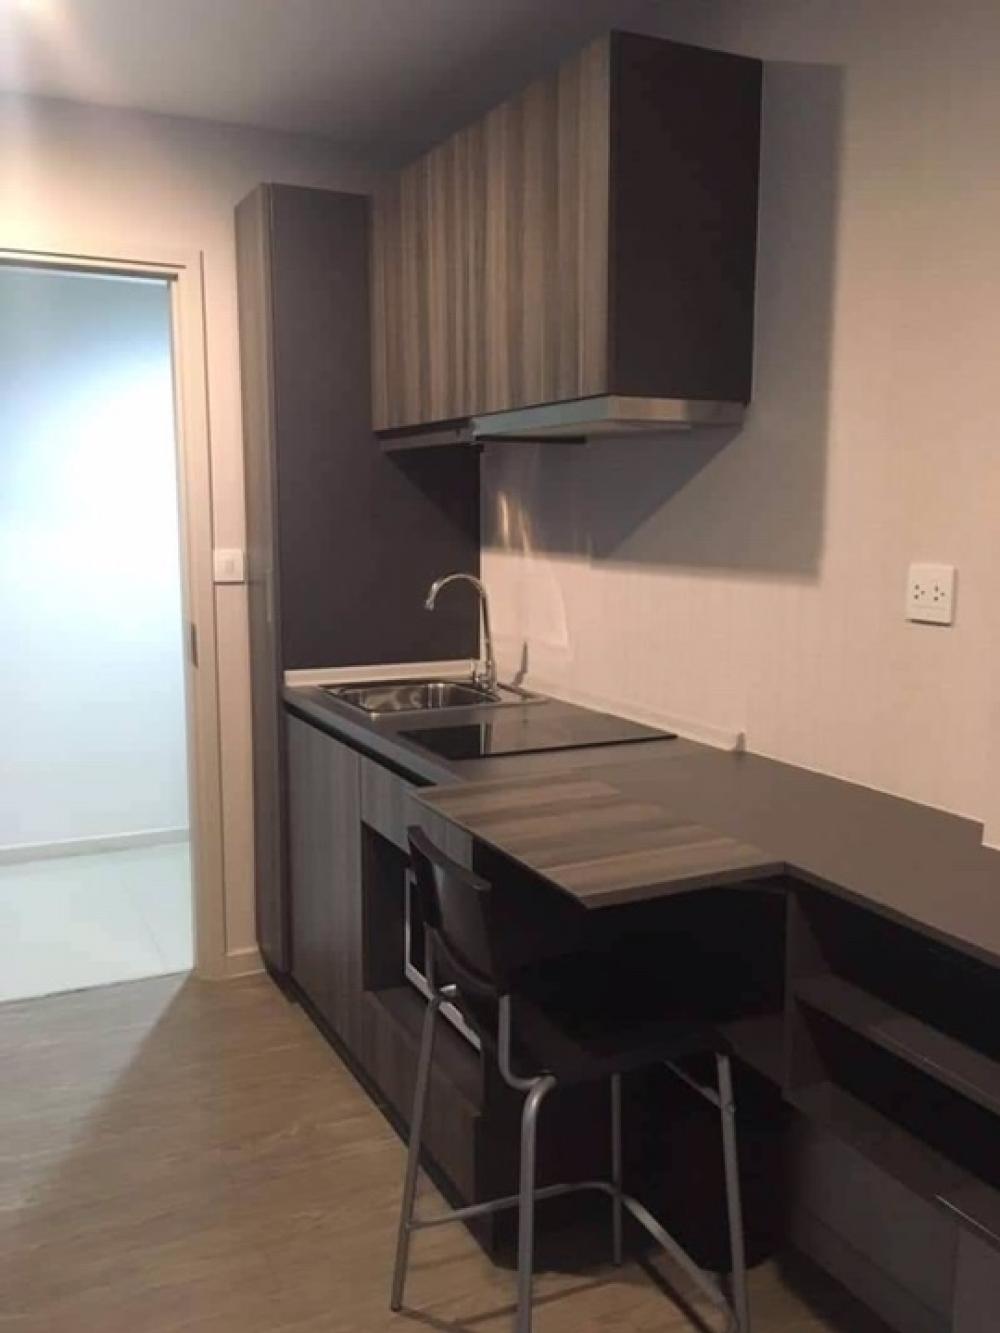 For RentCondoBangna, Bearing, Lasalle : NC-R1317 Condo for rent, Villa Lasalle, size 26 sq m., 1 bedroom, 4th floor, Building B, south balcony. Built-in furniture in the whole room Beautiful wallpaper in the whole room with 2 layers of curtains. Fully furnished with electric stove + hood. compl